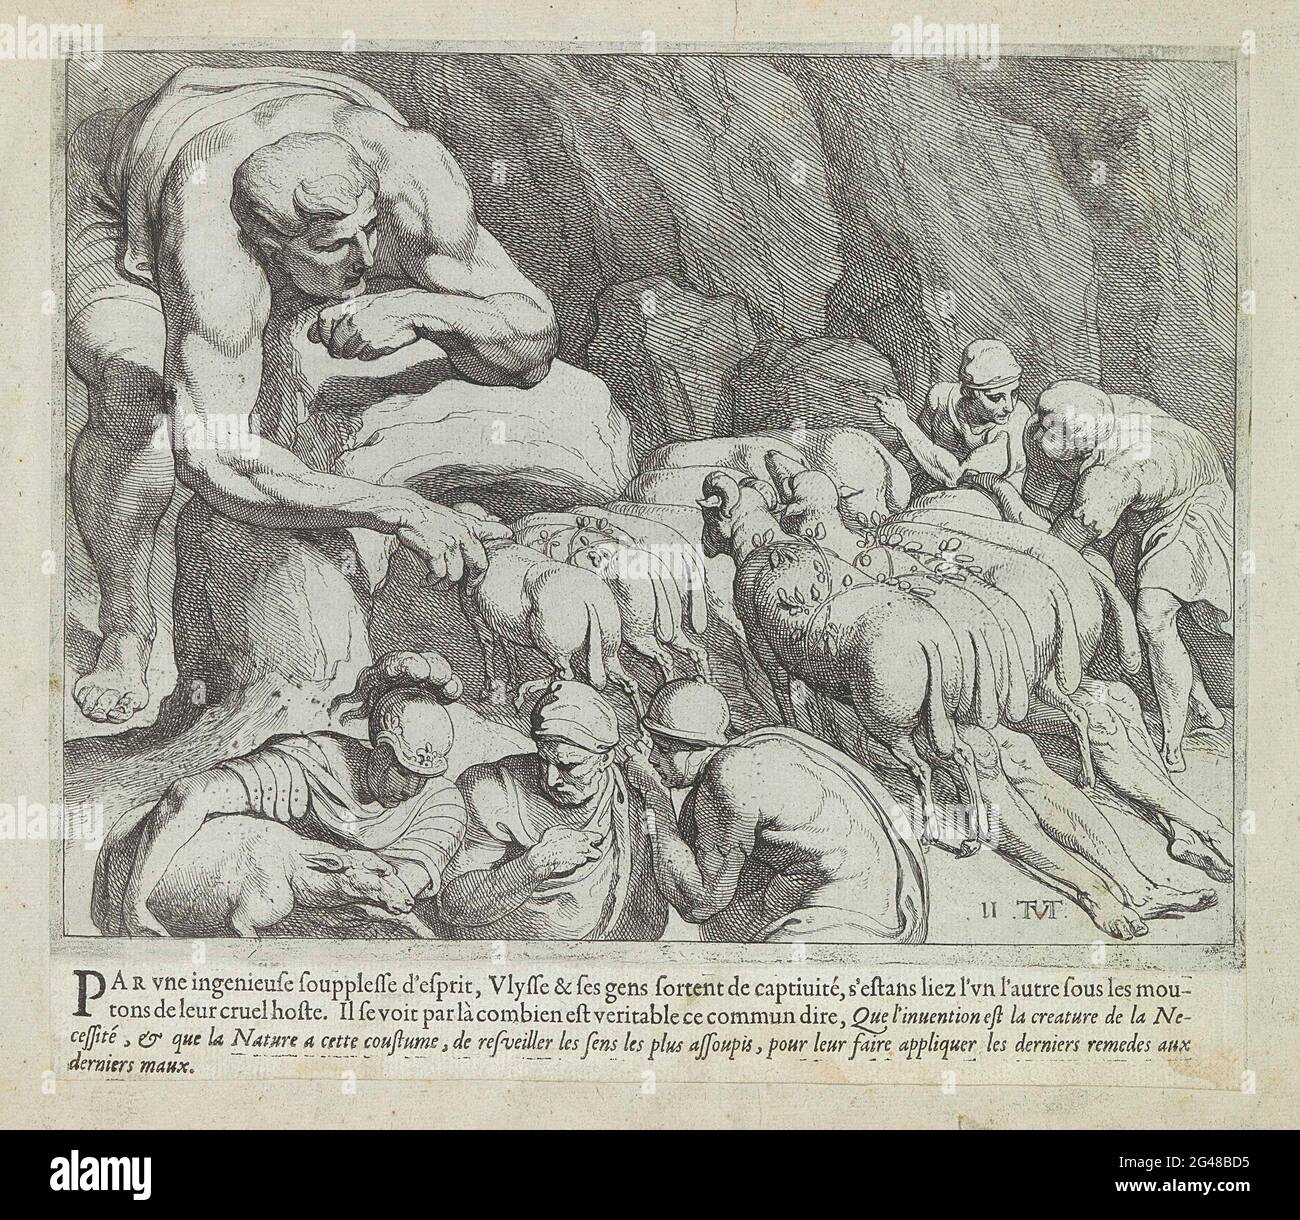 Odysseus escapes from the polyphemus cave; Les Travaux d'Ulysse; Odysseus works. The giant Polyphemus made by Odysseus blind opens his cave to leave his herd of sheep. Odysseus and his men escape the giant by hanging under the rams and sheep. The print is part of an album. Stock Photo